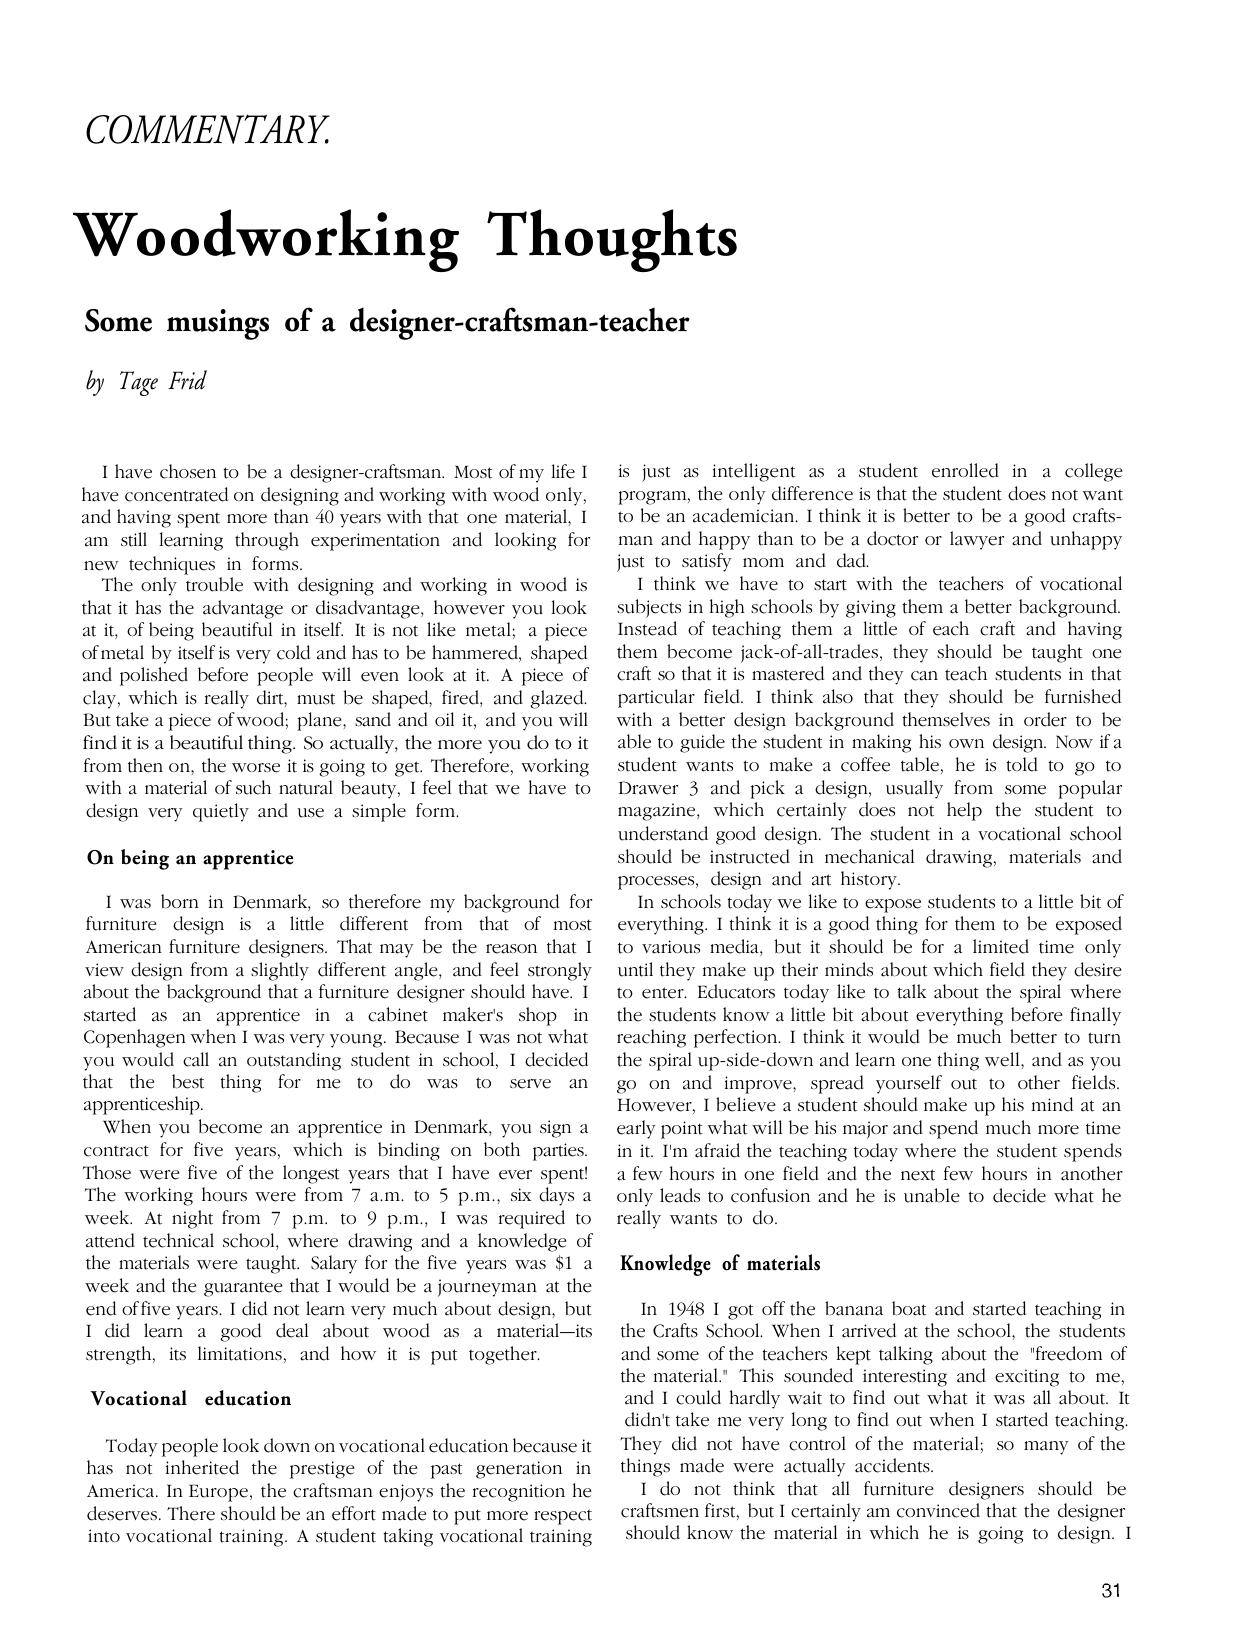 Woodworking Thoughts by Tage Frid